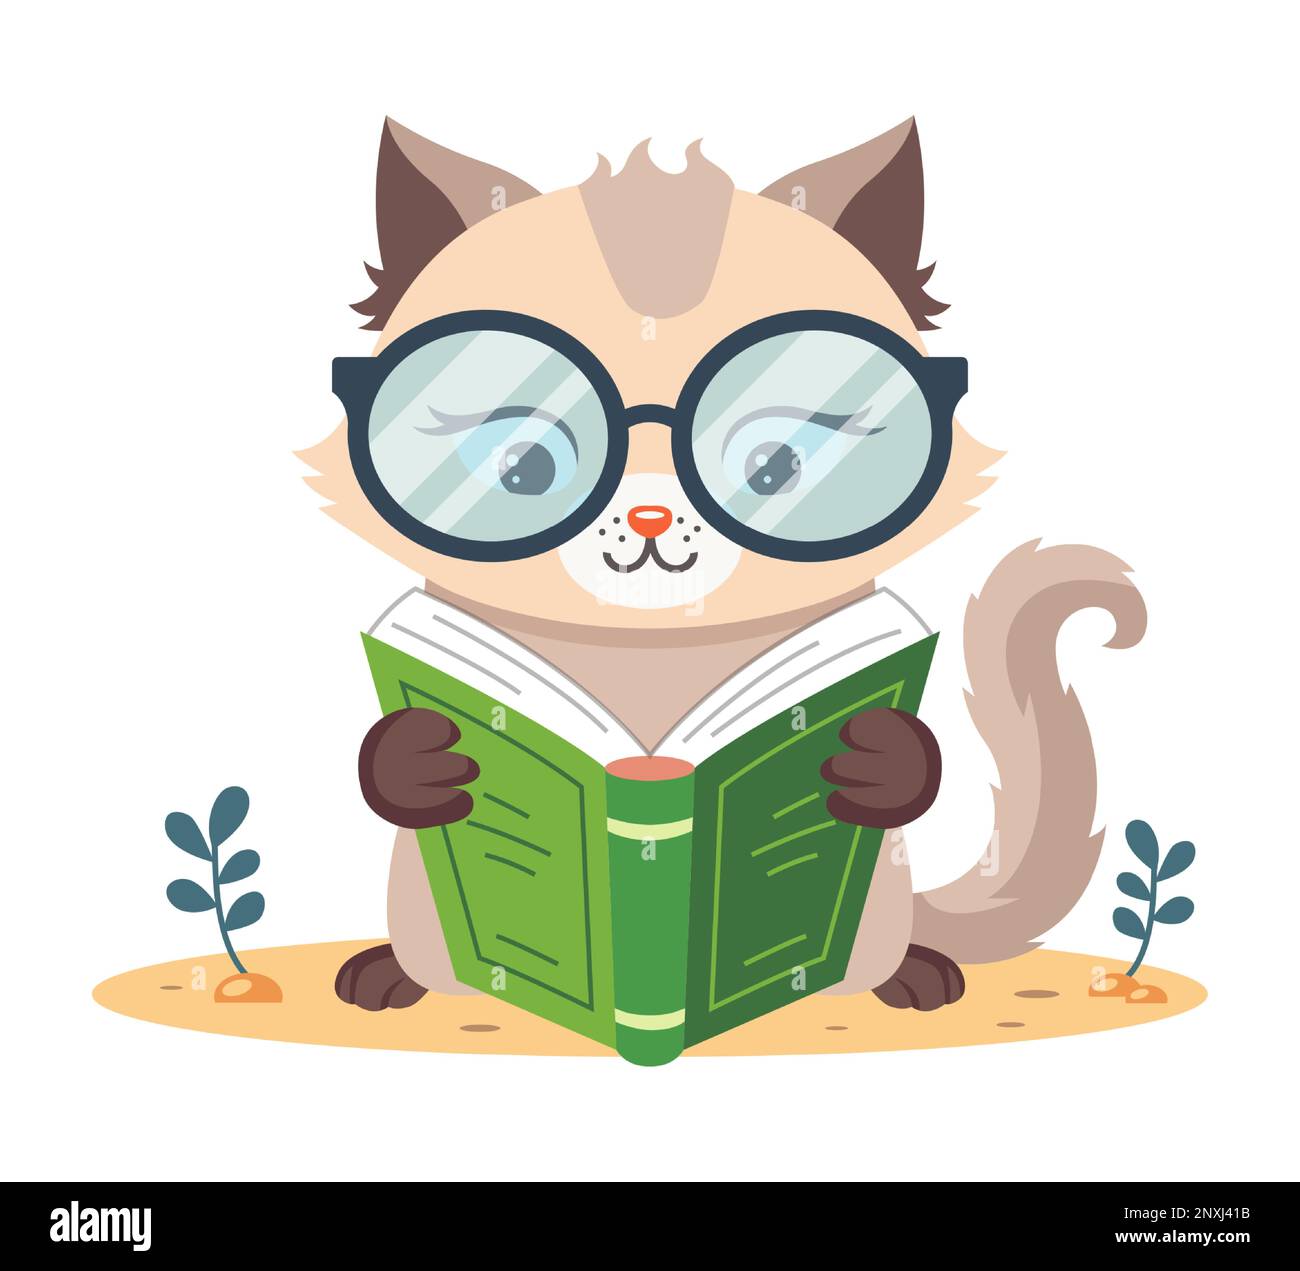 Illustration very cute cat wearing glasses reading book